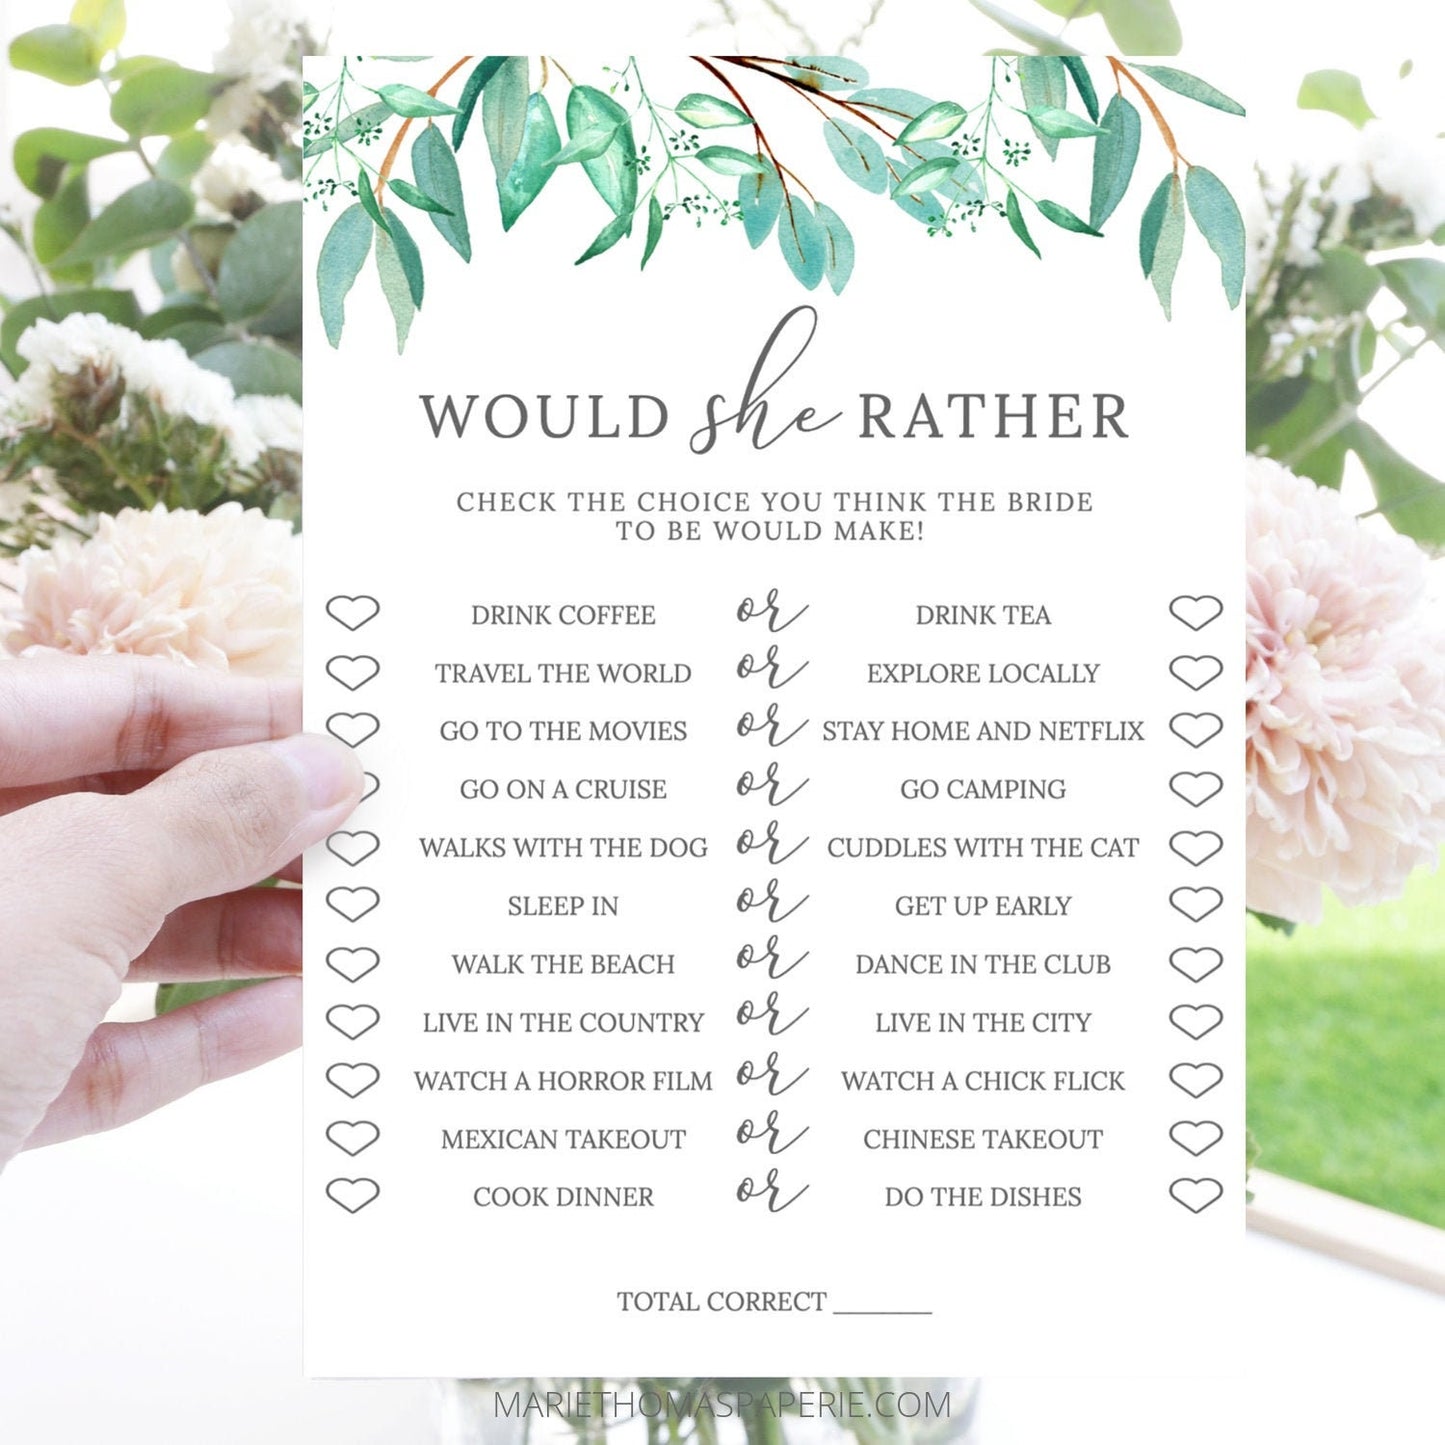 Editable Would She Rather Bridal Shower Games Wedding Games Bridal Game Greenery Template